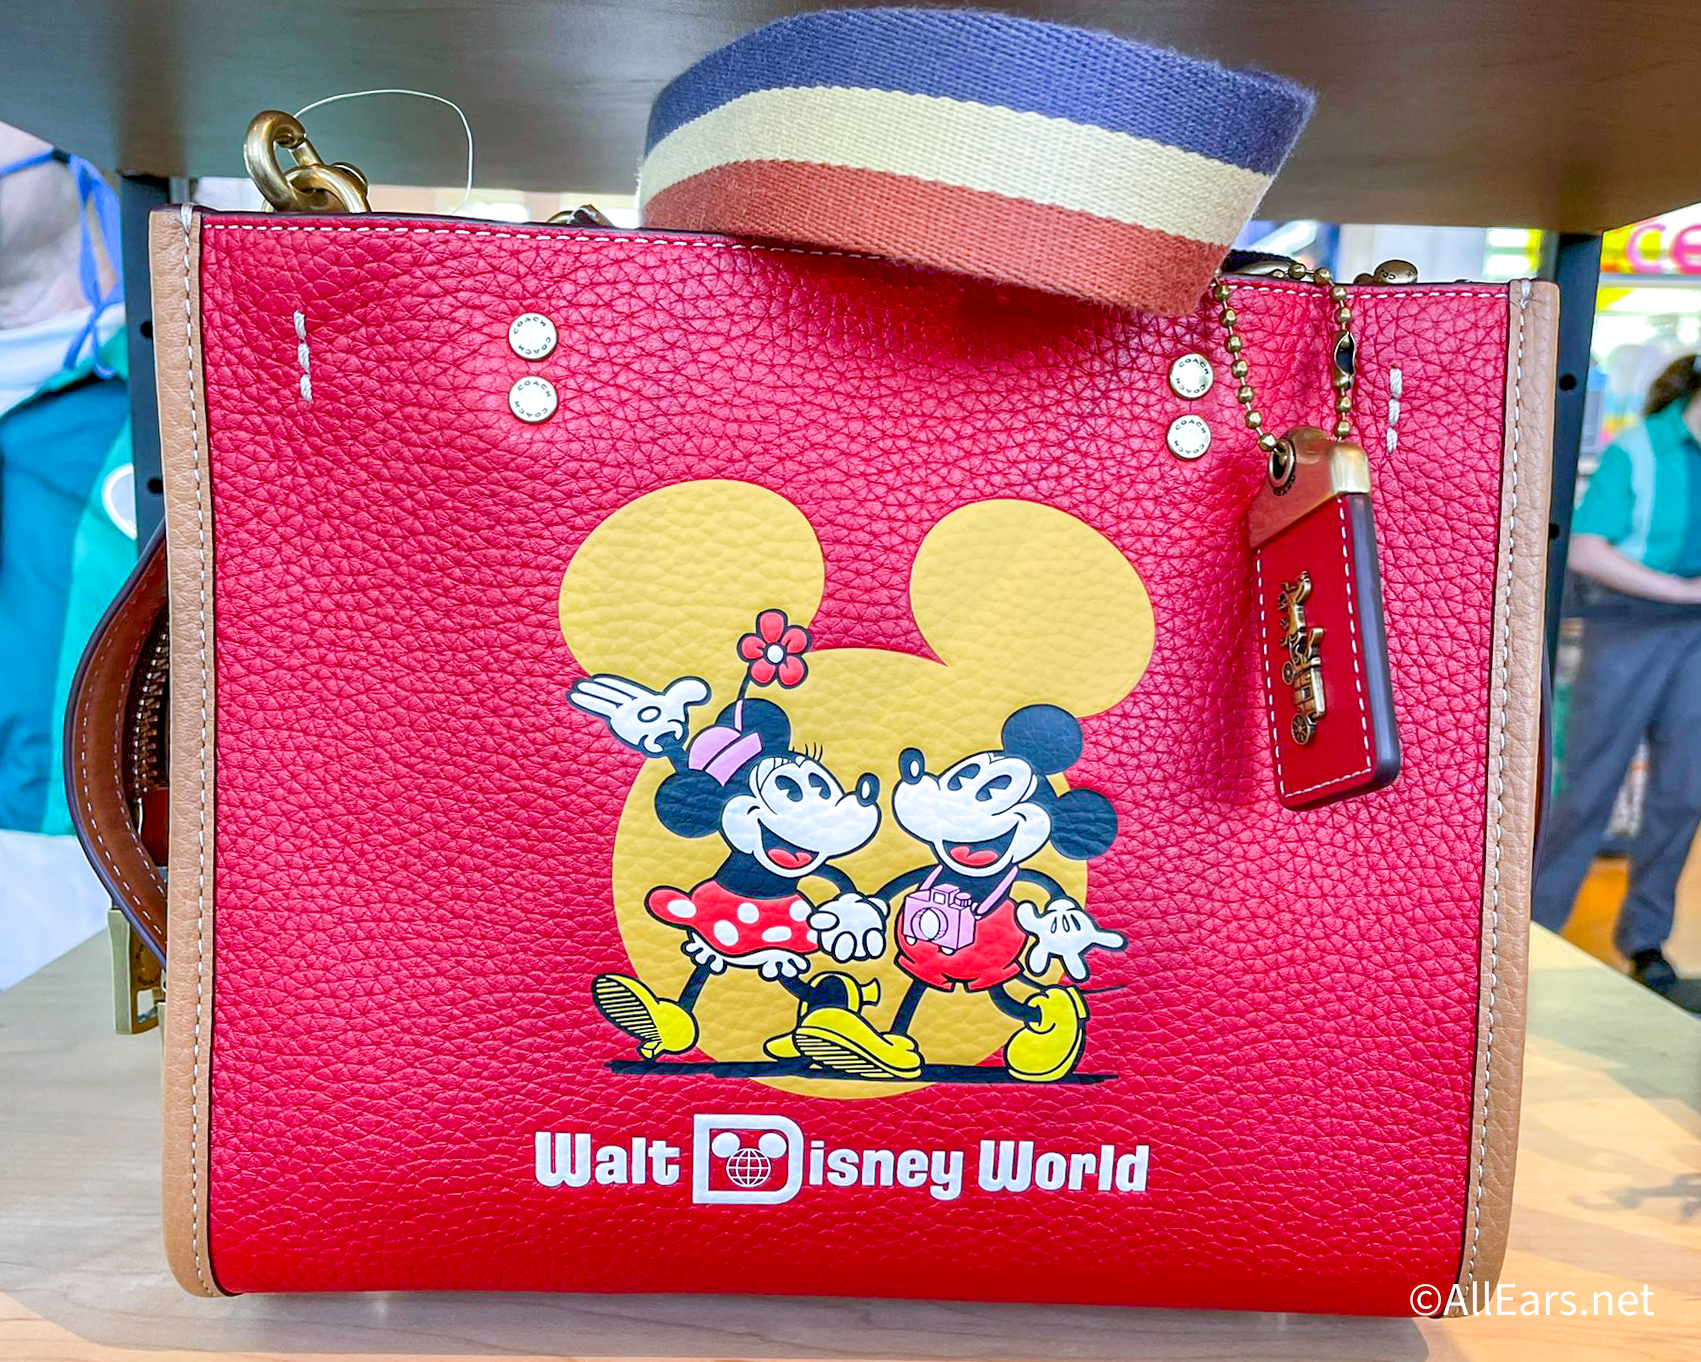 The Pricey 50th Anniversary Disney x Coach Collection Is Available